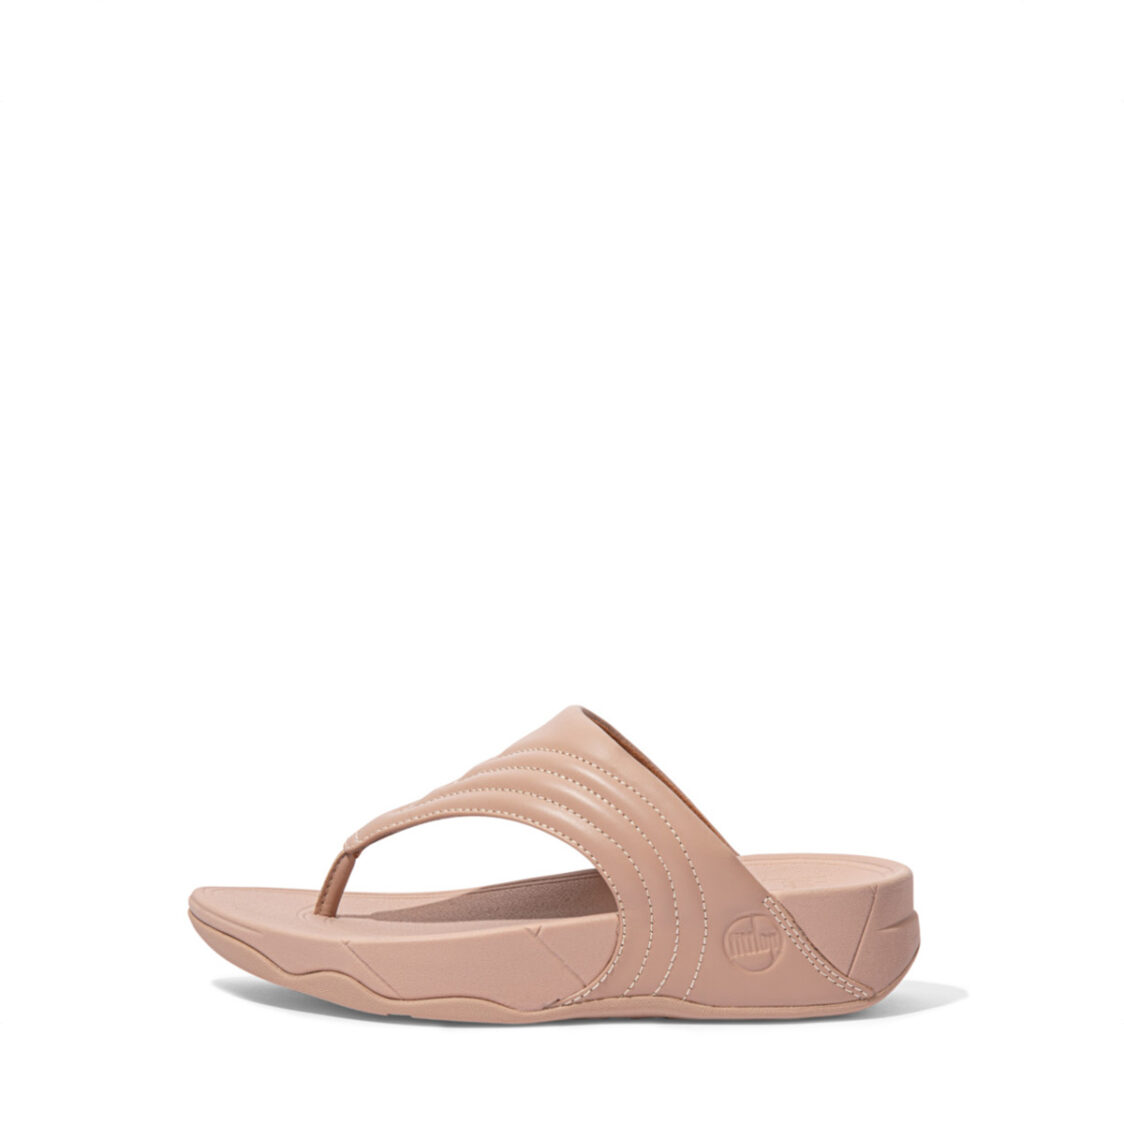 Fitflop Walkstar Leather Toe-Post Sandals Beige Dx5-137